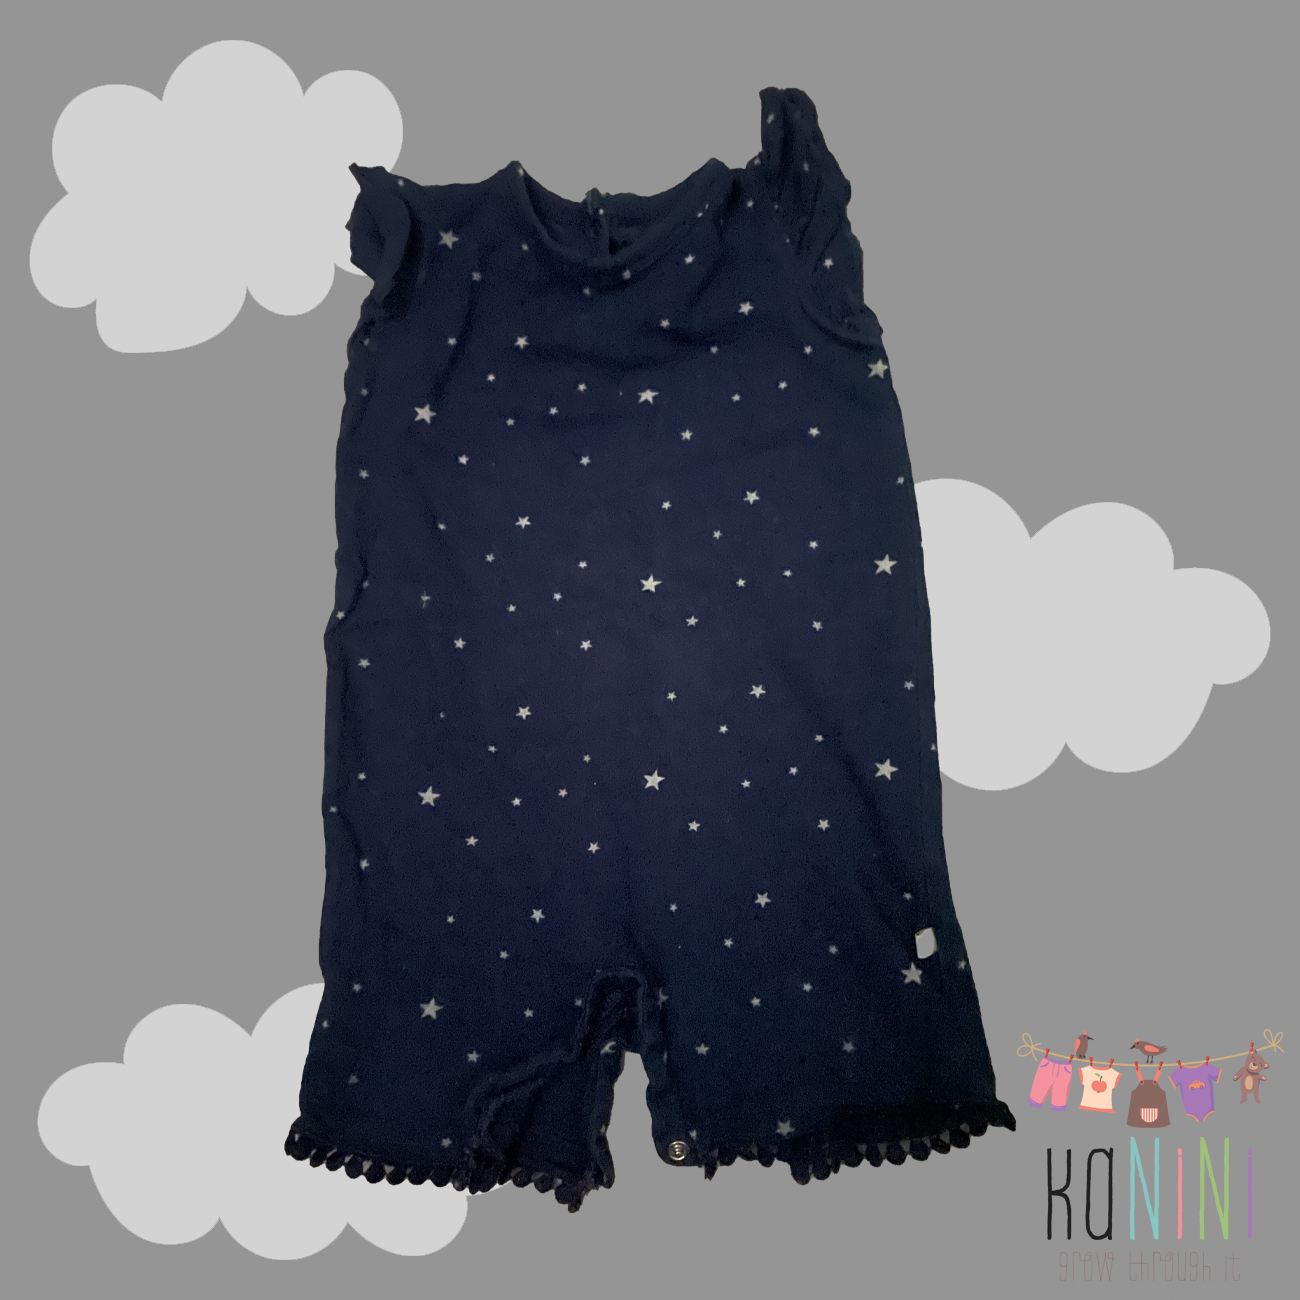 Featured image for “Woolworths 3 - 6 Months Unisex Navy Romper”